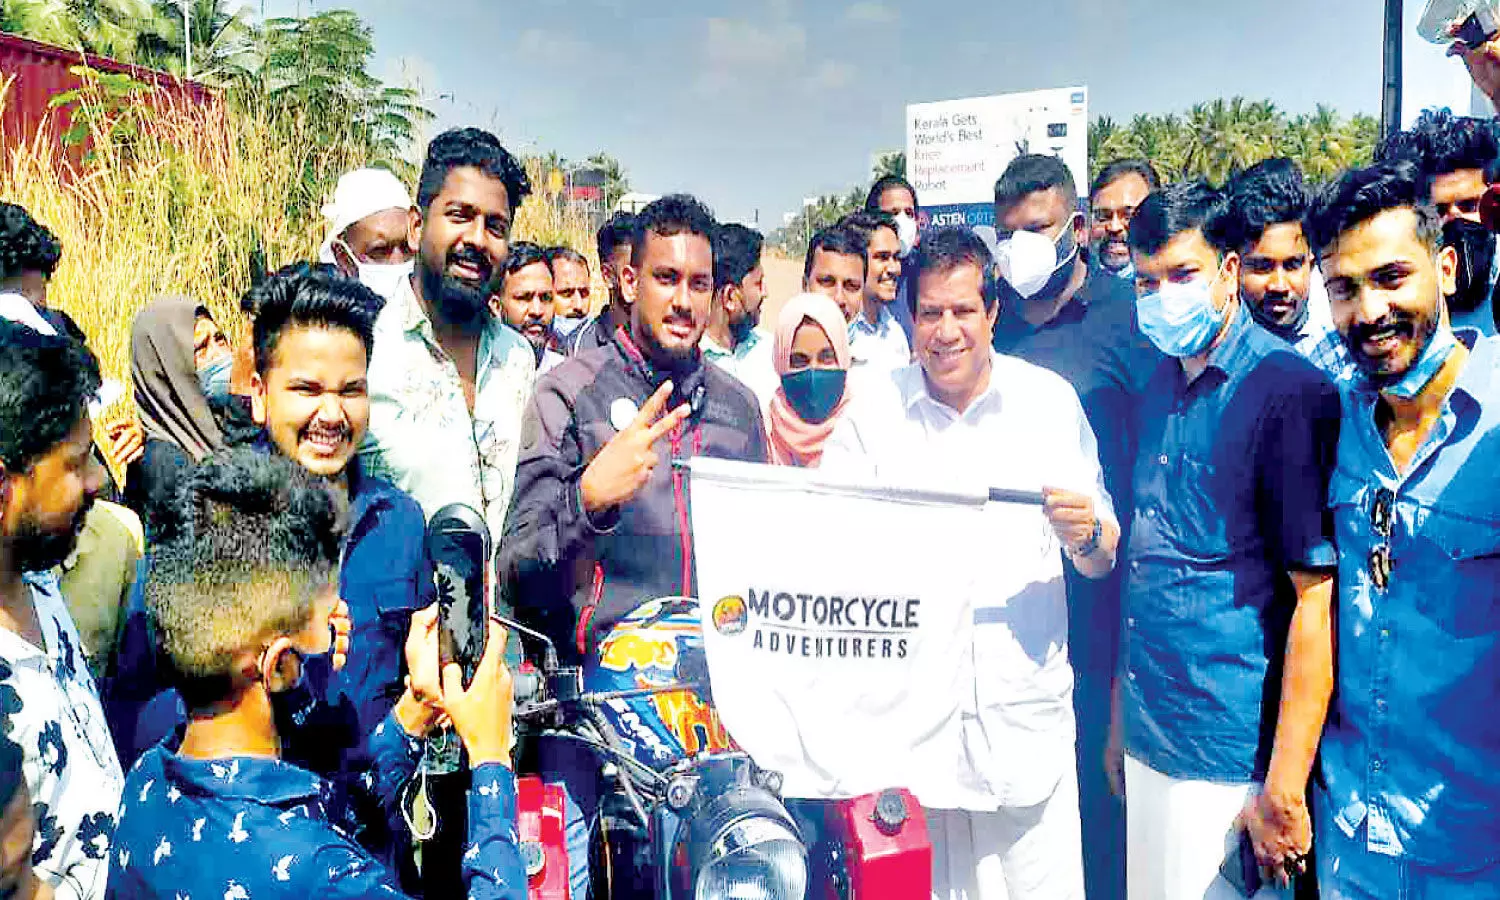 32 countries in one year Dilshad bike ride started